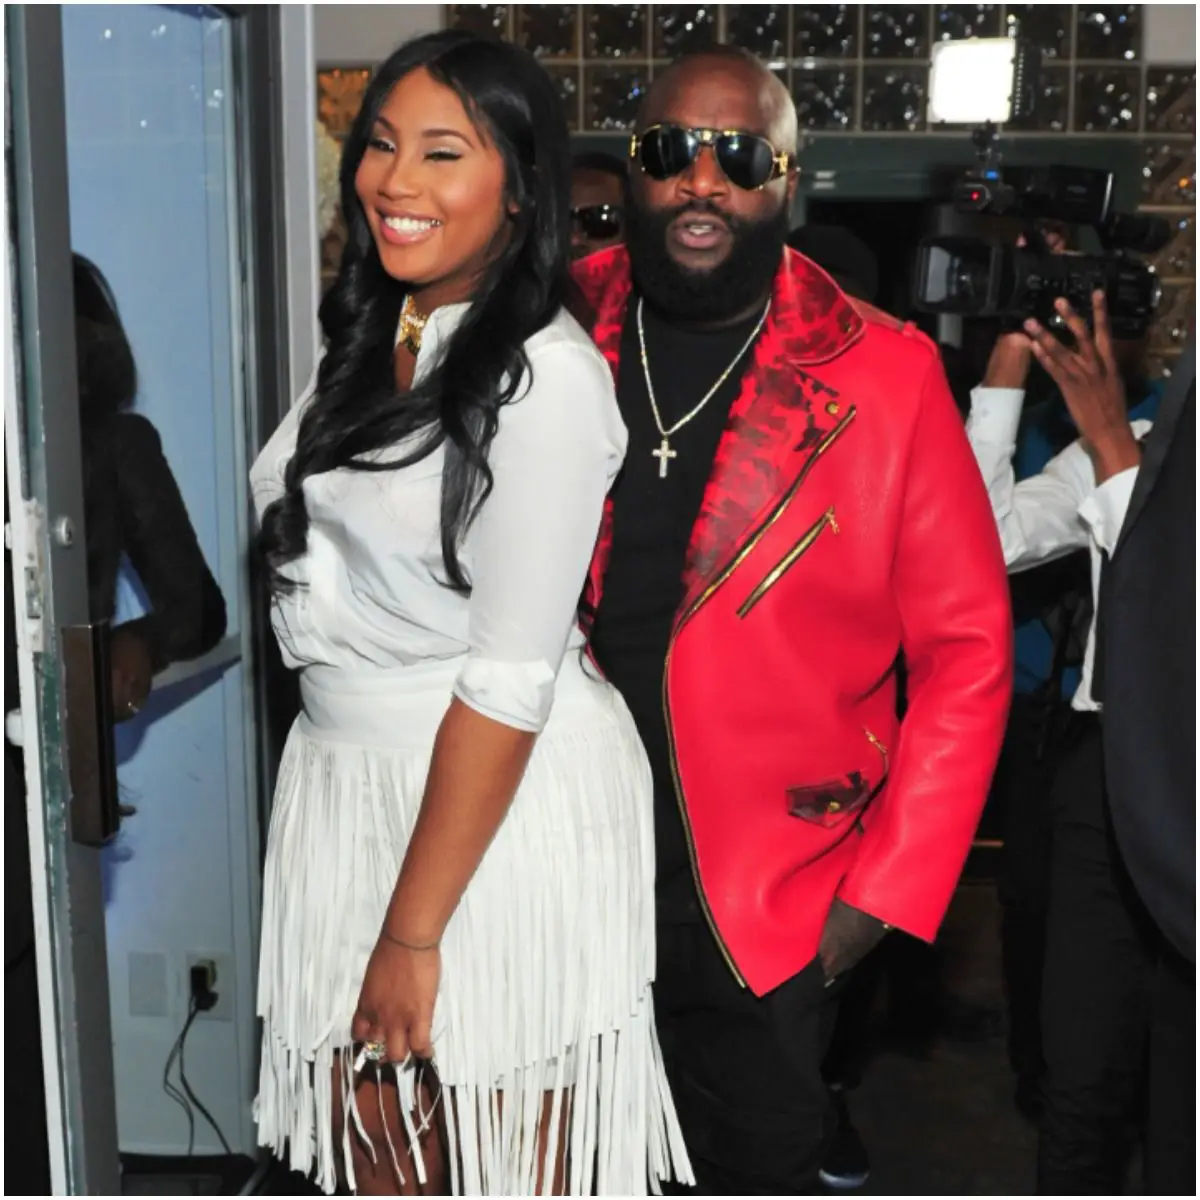 Ming Lee with her boyfriend Rick Ross